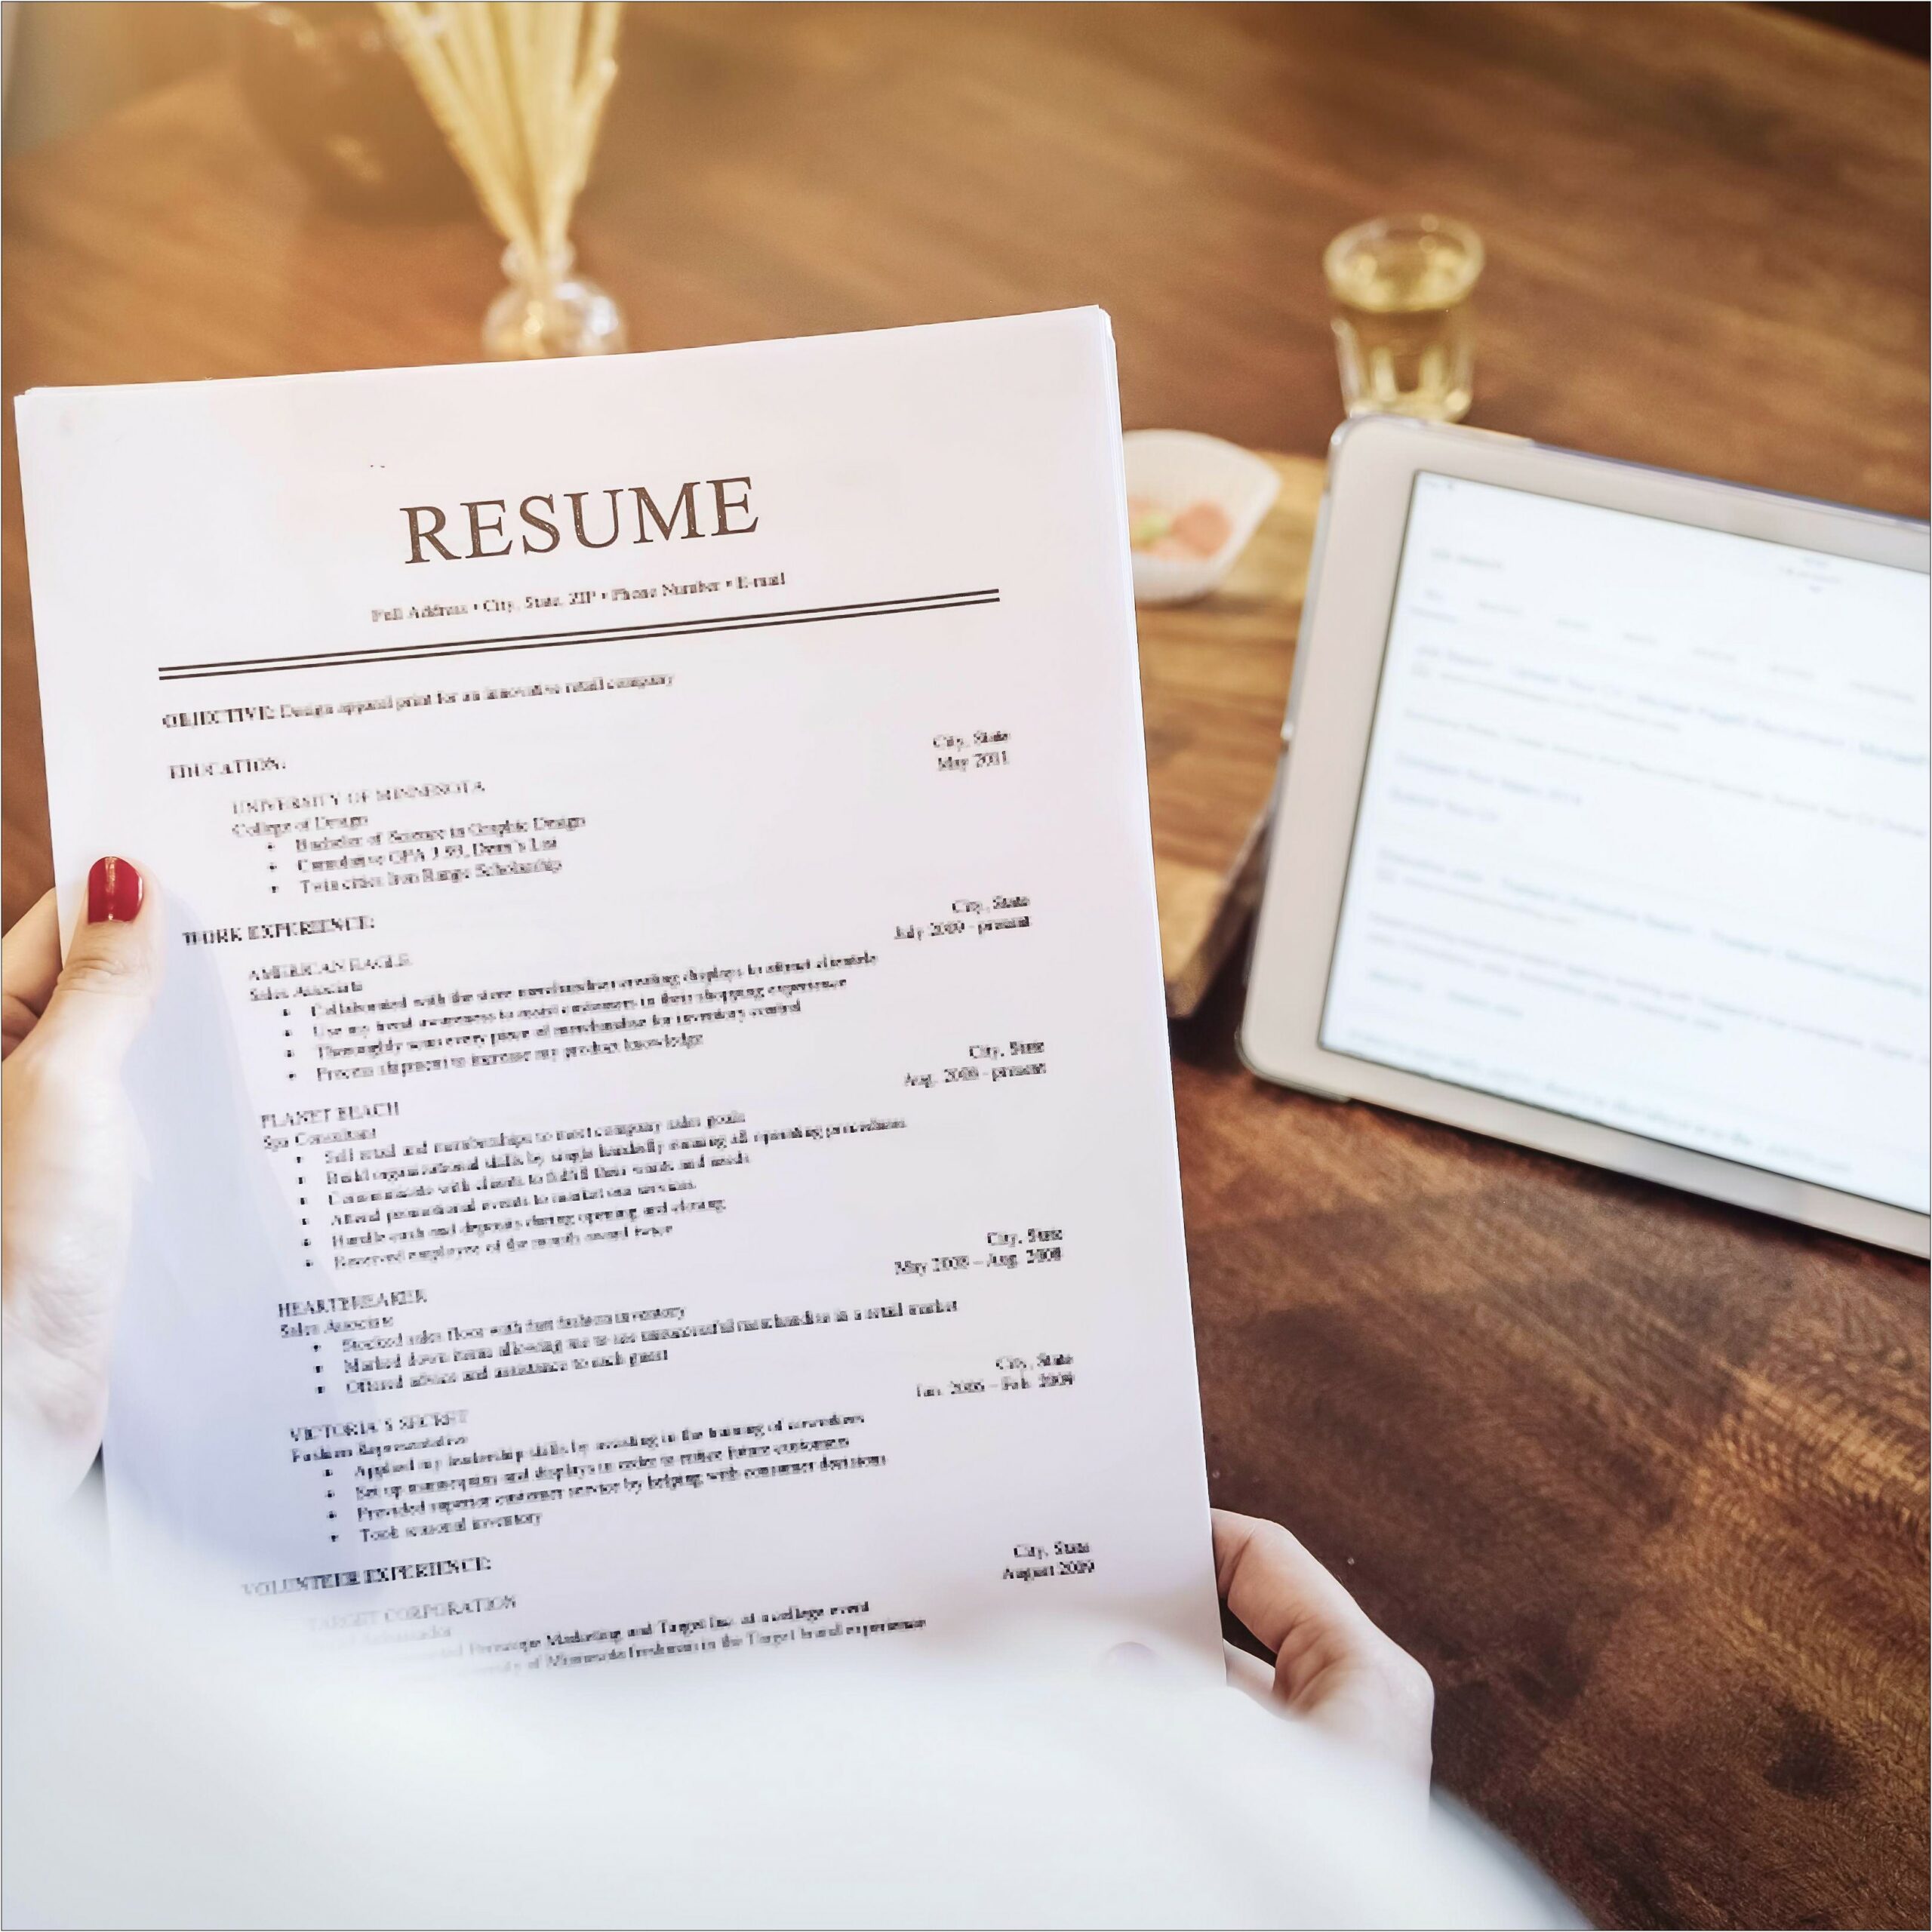 Proper Job Placement On A Resume